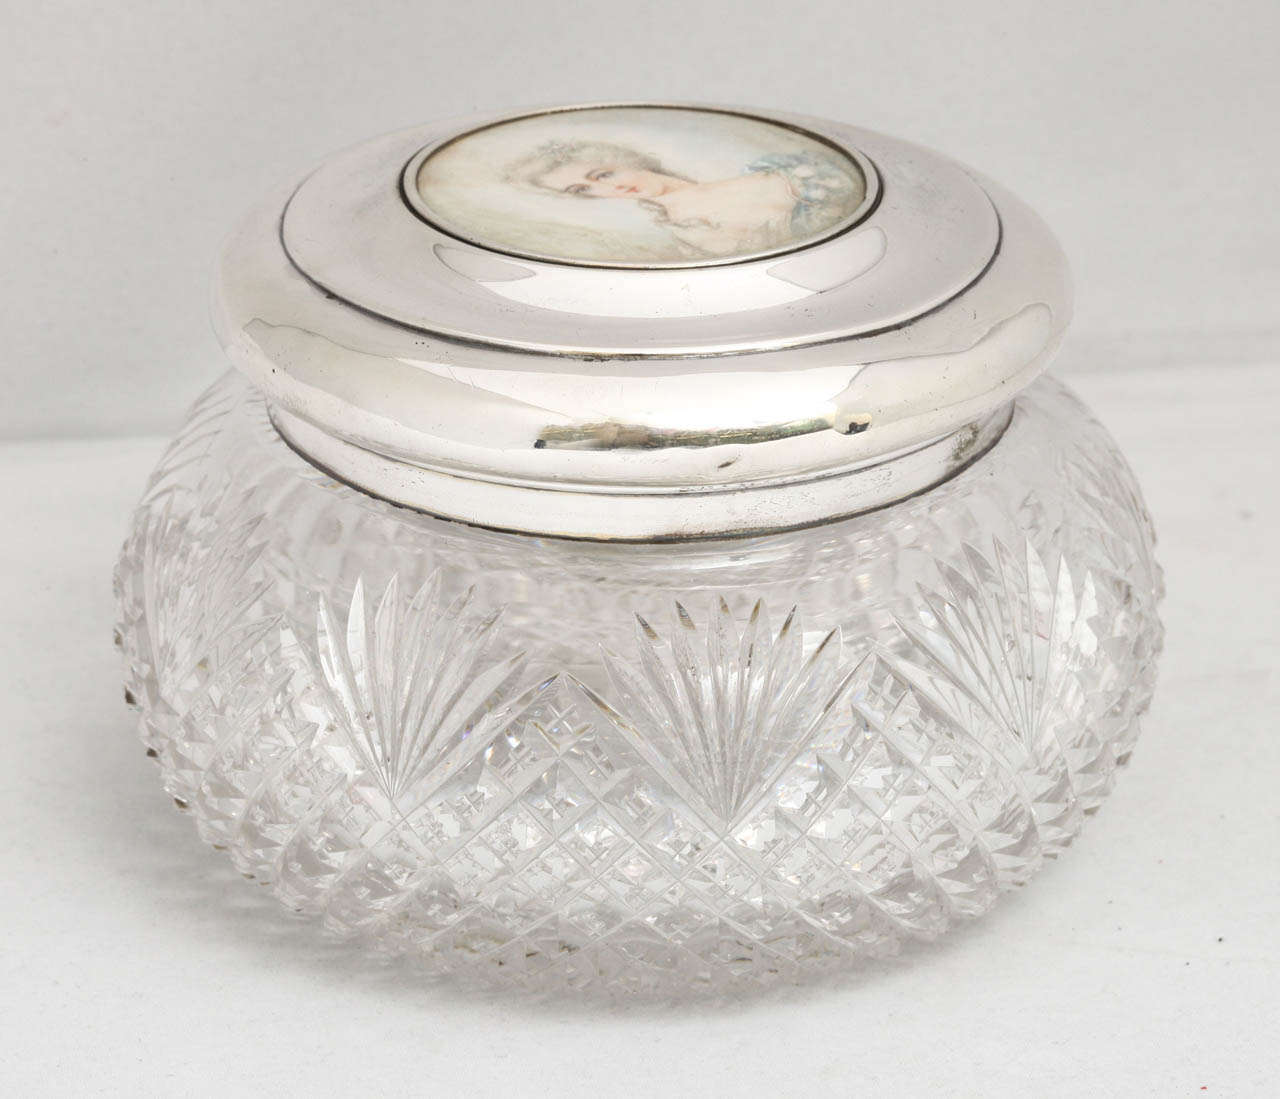 Rare, Edwardian, sterling silver-mounted cut crystal powder jar, having a signed water color portrait (under glass) of a beautiful woman inset into the jar lid; S. Cottle and Co., New York - makers, circa 1900-1910. Crystal is beautifully cut and